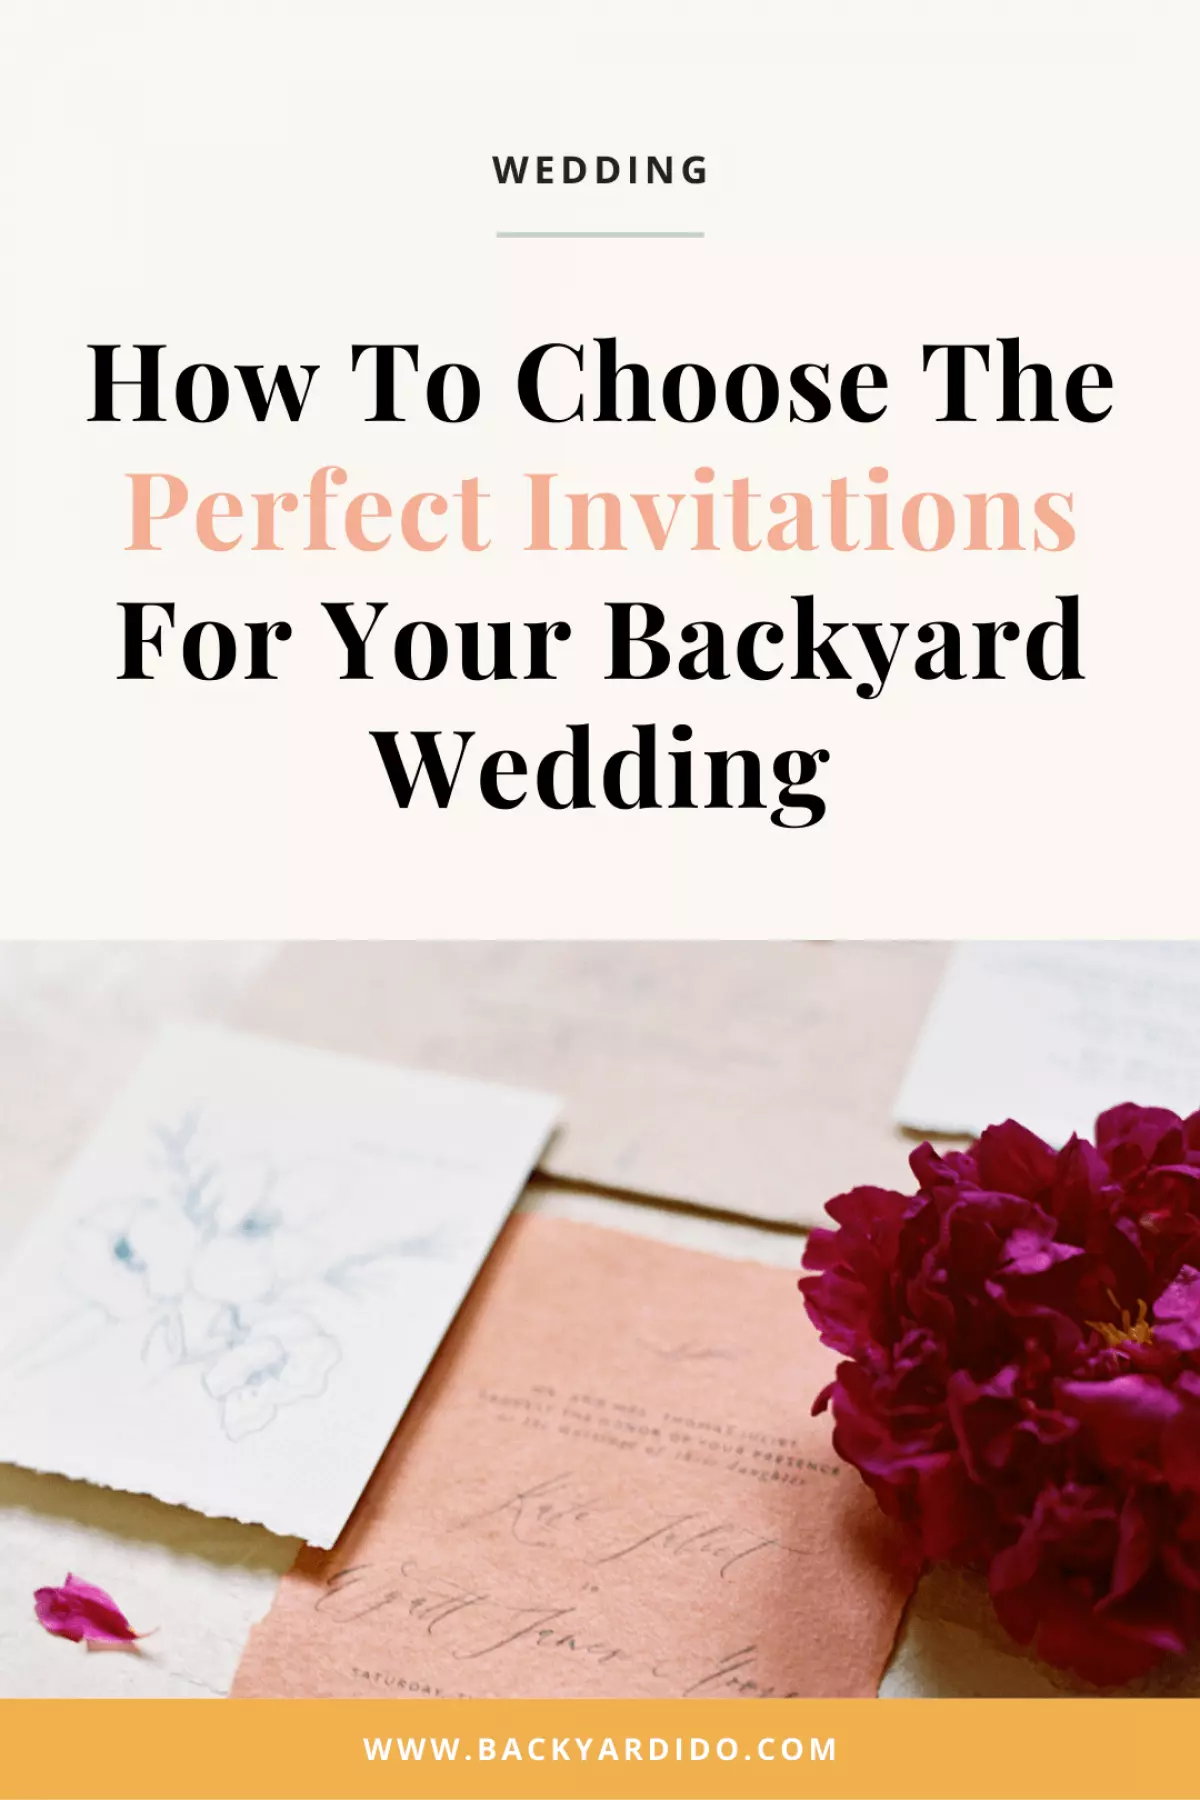 How To Choose The Perfect Invitations For Your Backyard Wedding